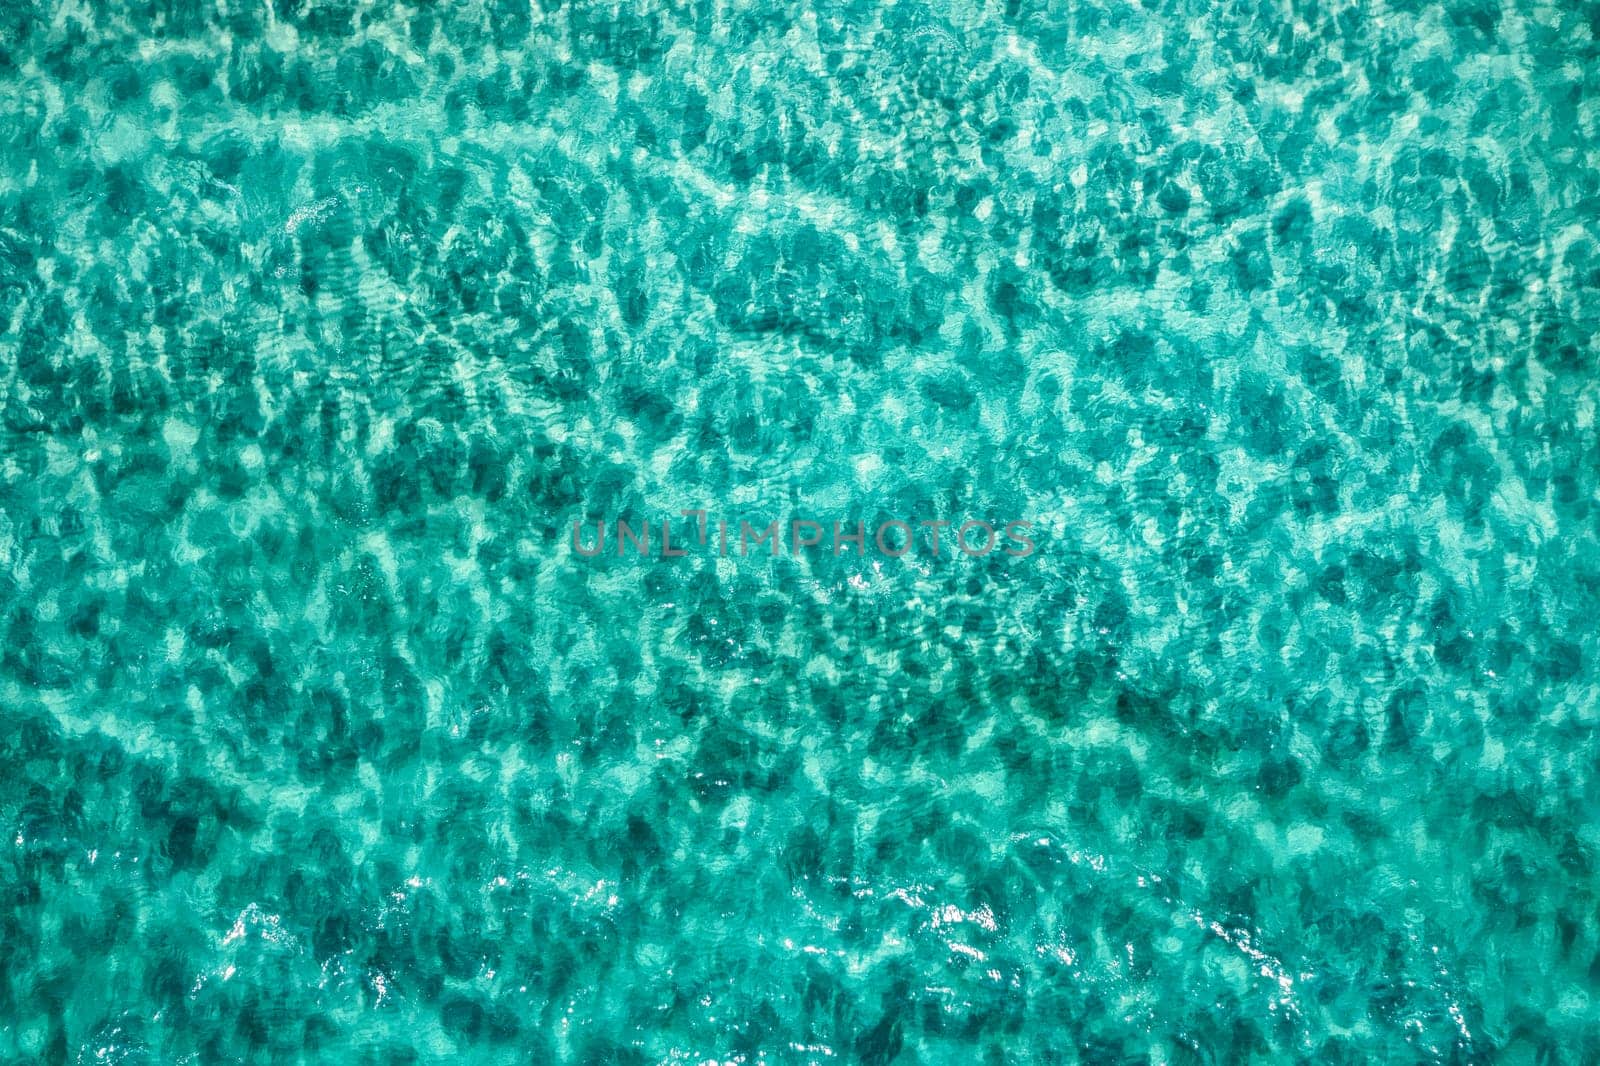 Punta Prosciutto azure sea water, crystal clear water on beach Punta Prosciutto, Italian Maldives Puglia Italy. Punta Prosciutto in Apulia, one of the most beautiful beaches of Italy. by DaLiu